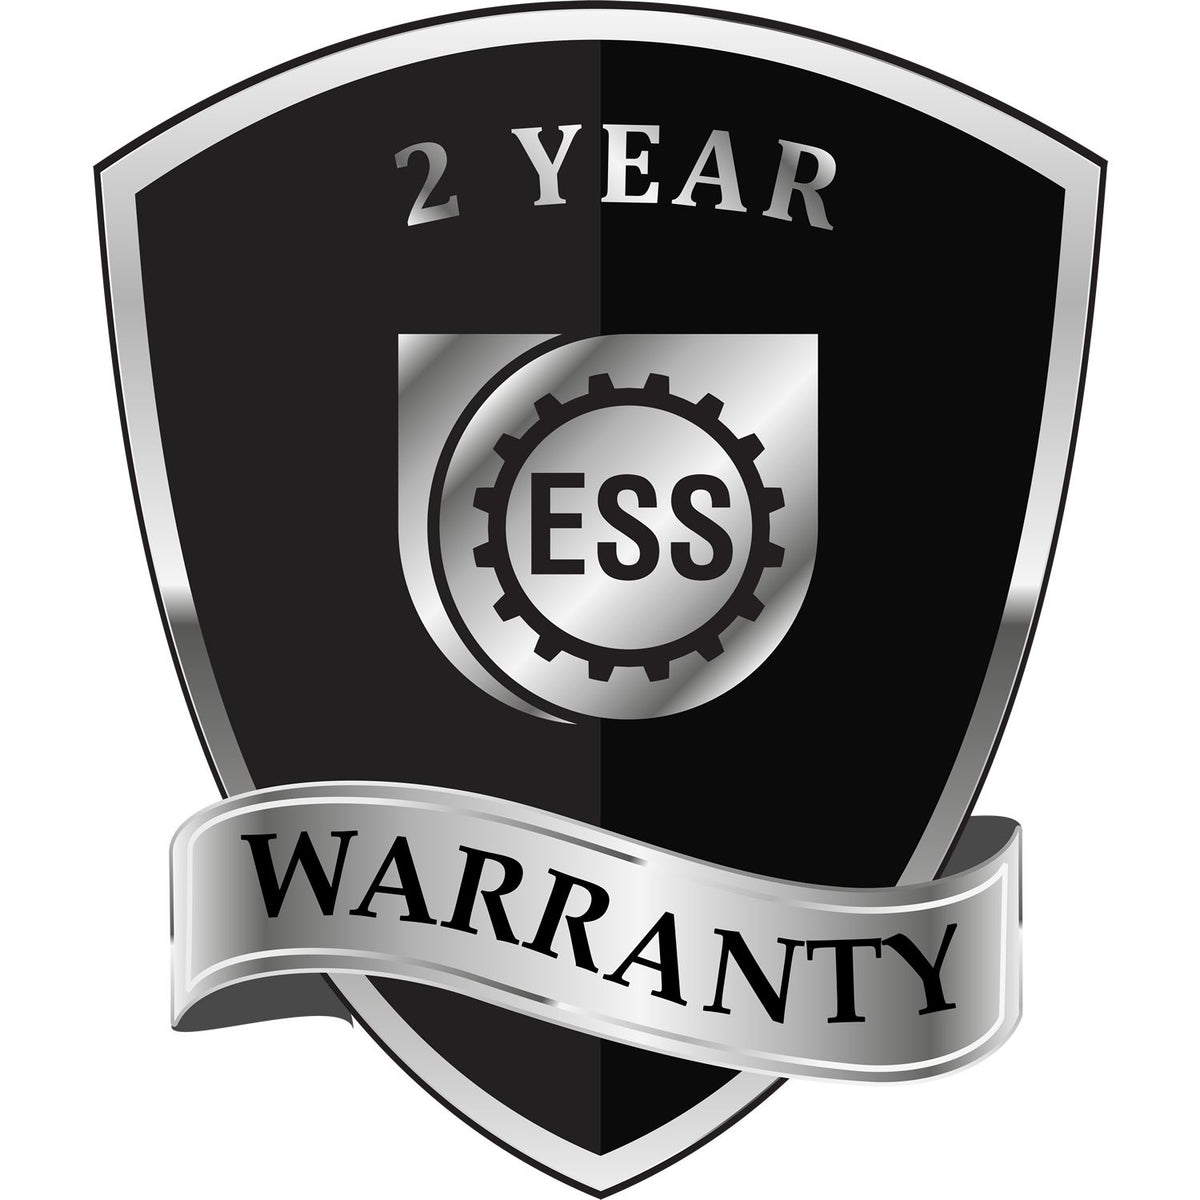 A badge or emblem showing a warranty icon for the Long Reach Arkansas PE Seal